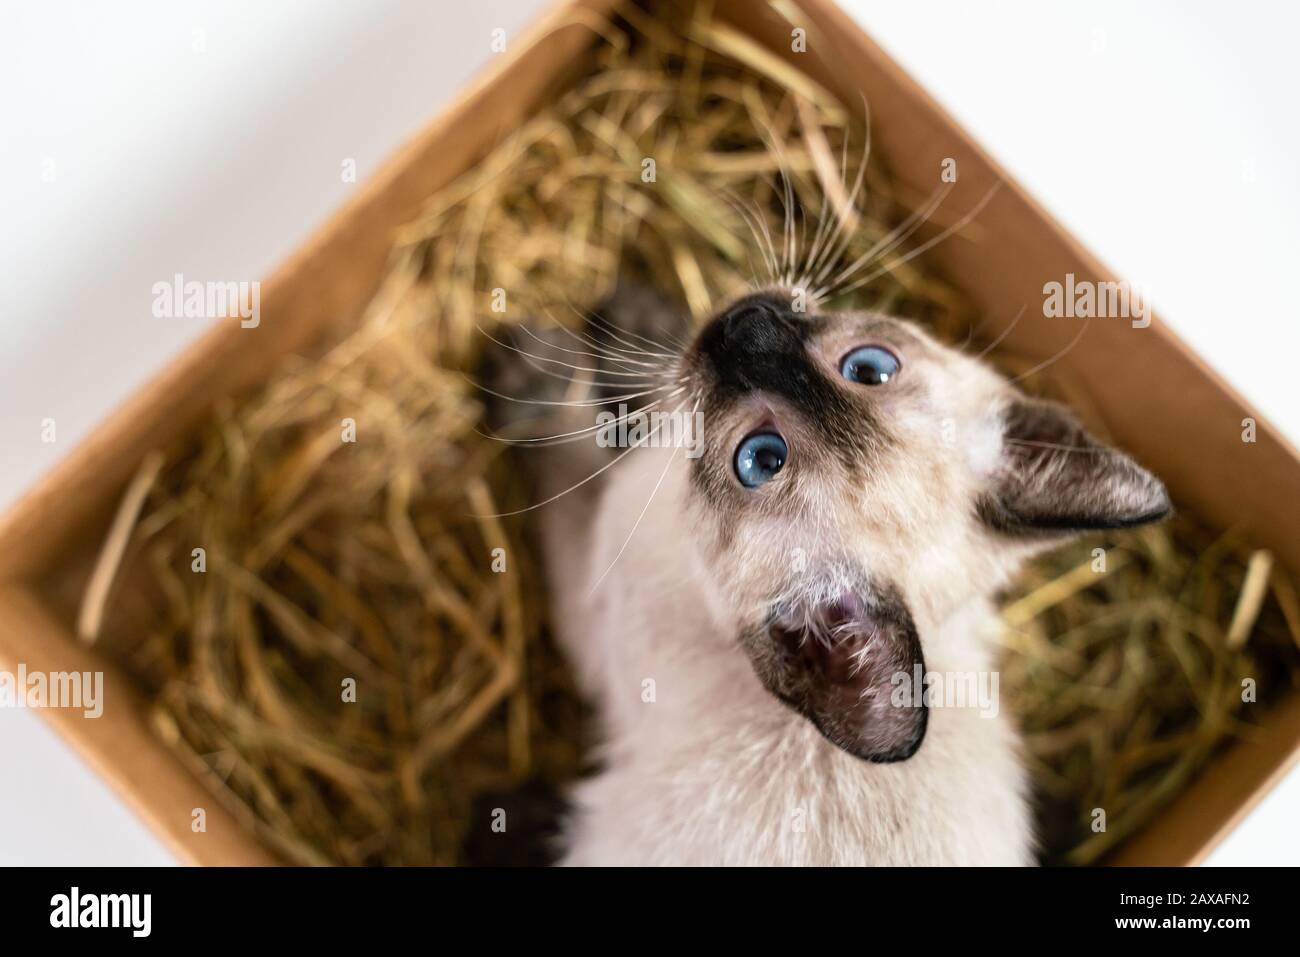 Cute kitten hiding in a box basket. Purebred 2 month old Siamese cat with blue almond shaped eyes on box basket background. Concepts of pets play hidi Stock Photo